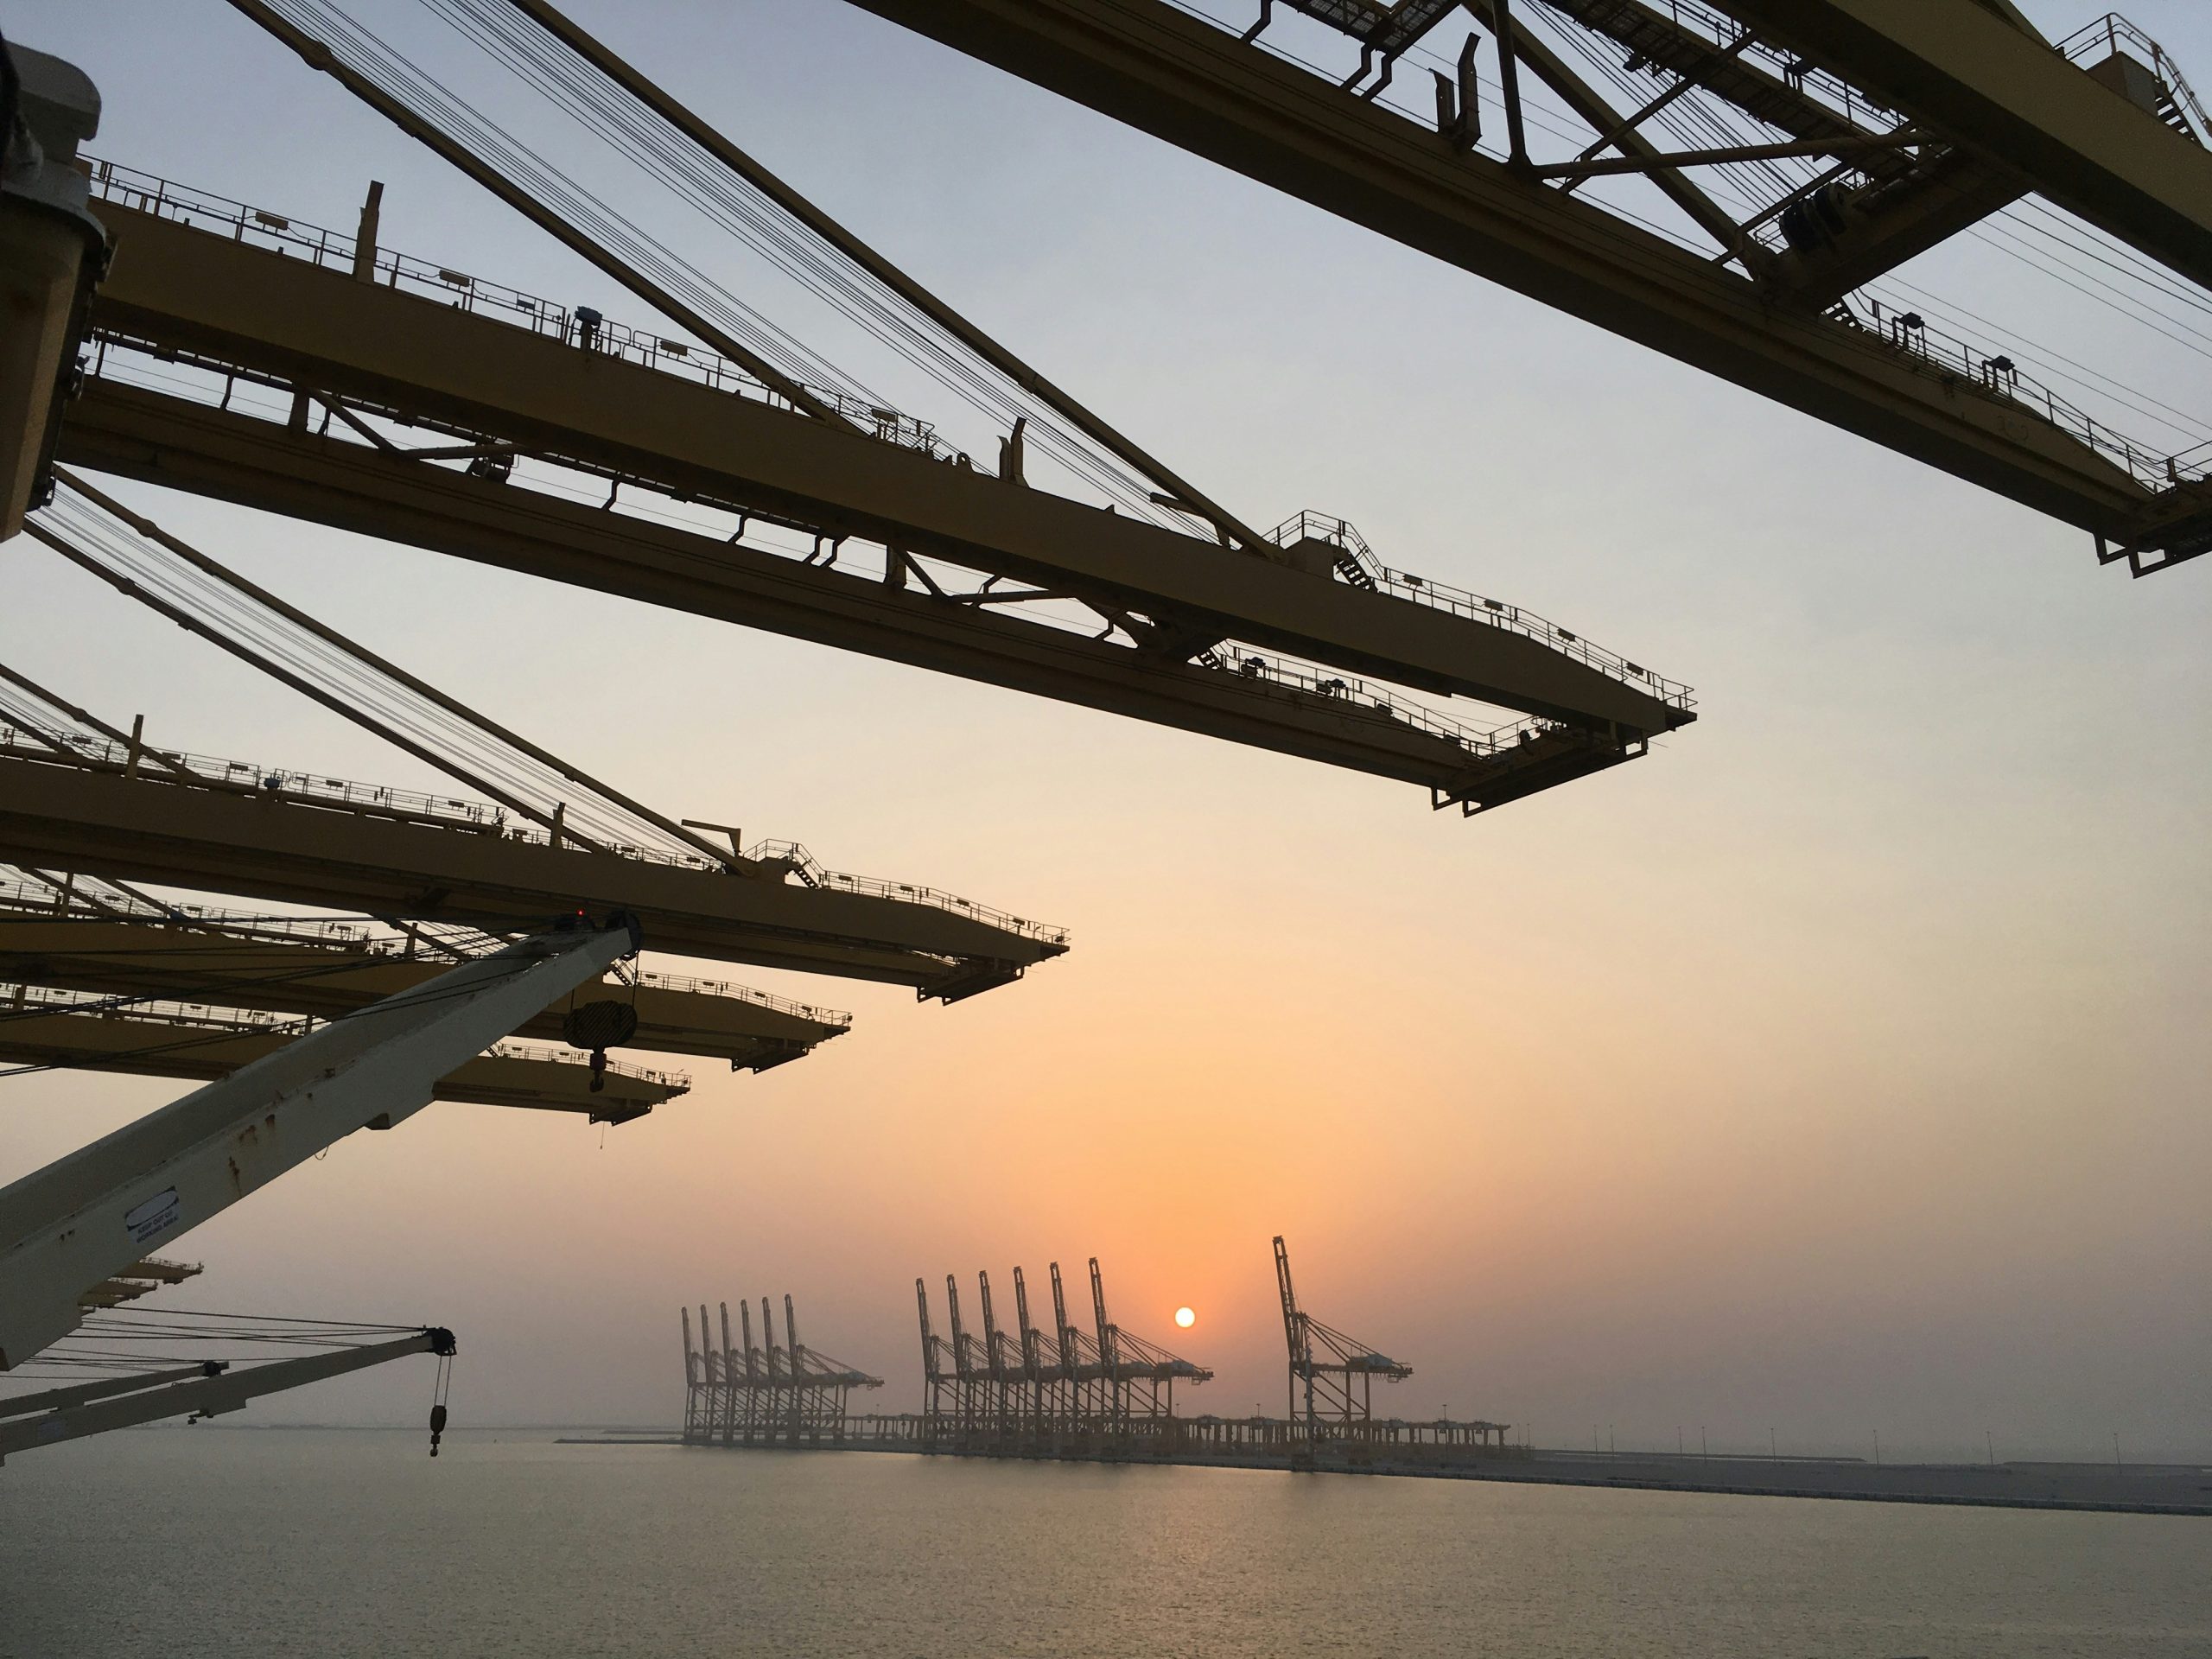 Port of Jebel Ali, Dubai, United Arab Emirates is the ninth busiest port in the world